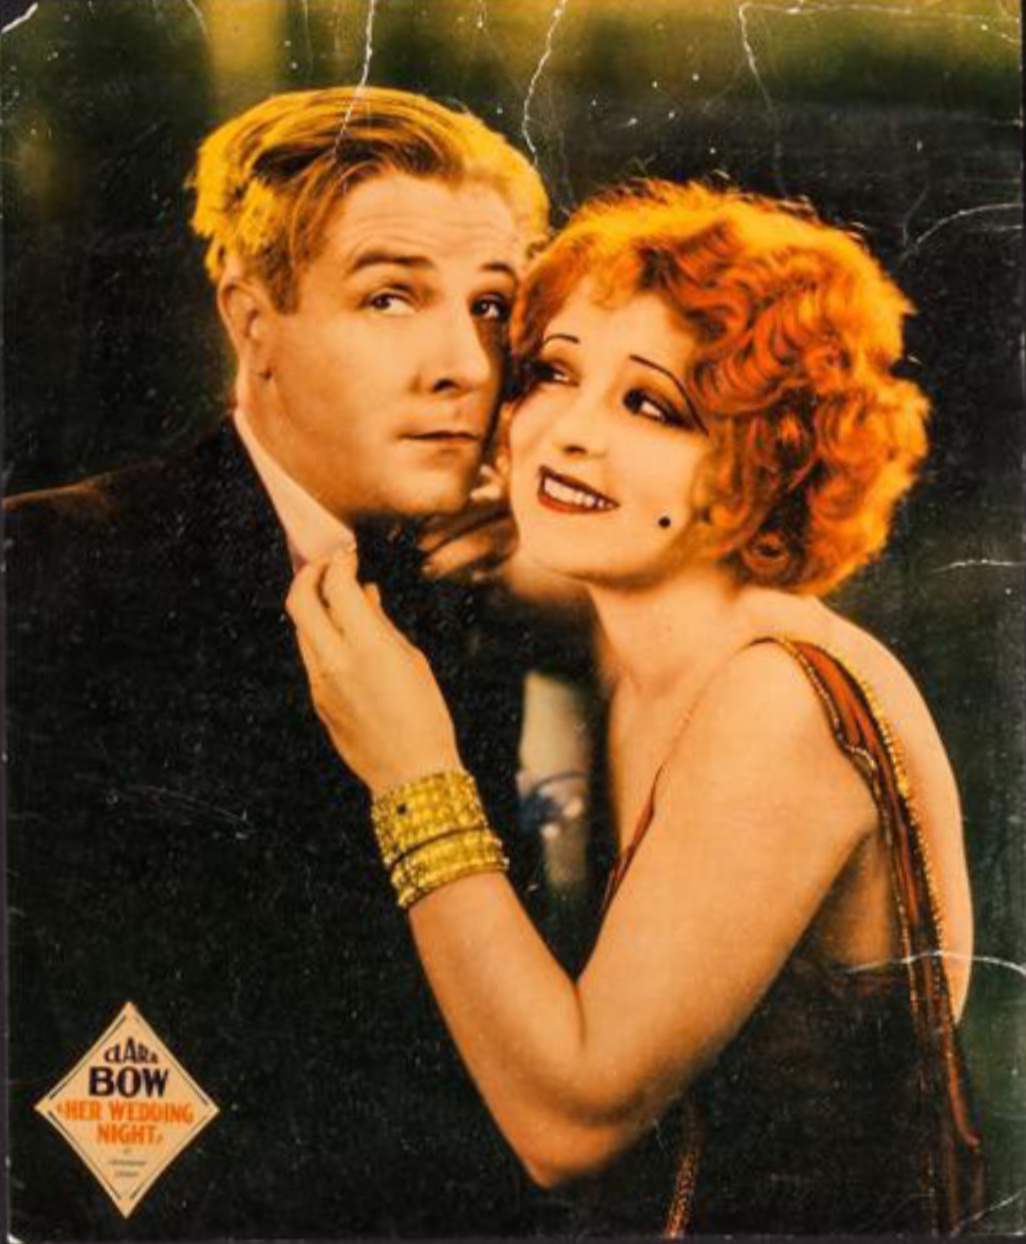 Clara Bow and Richard 'Skeets' Gallagher in 'Her Wedding Night', 1930